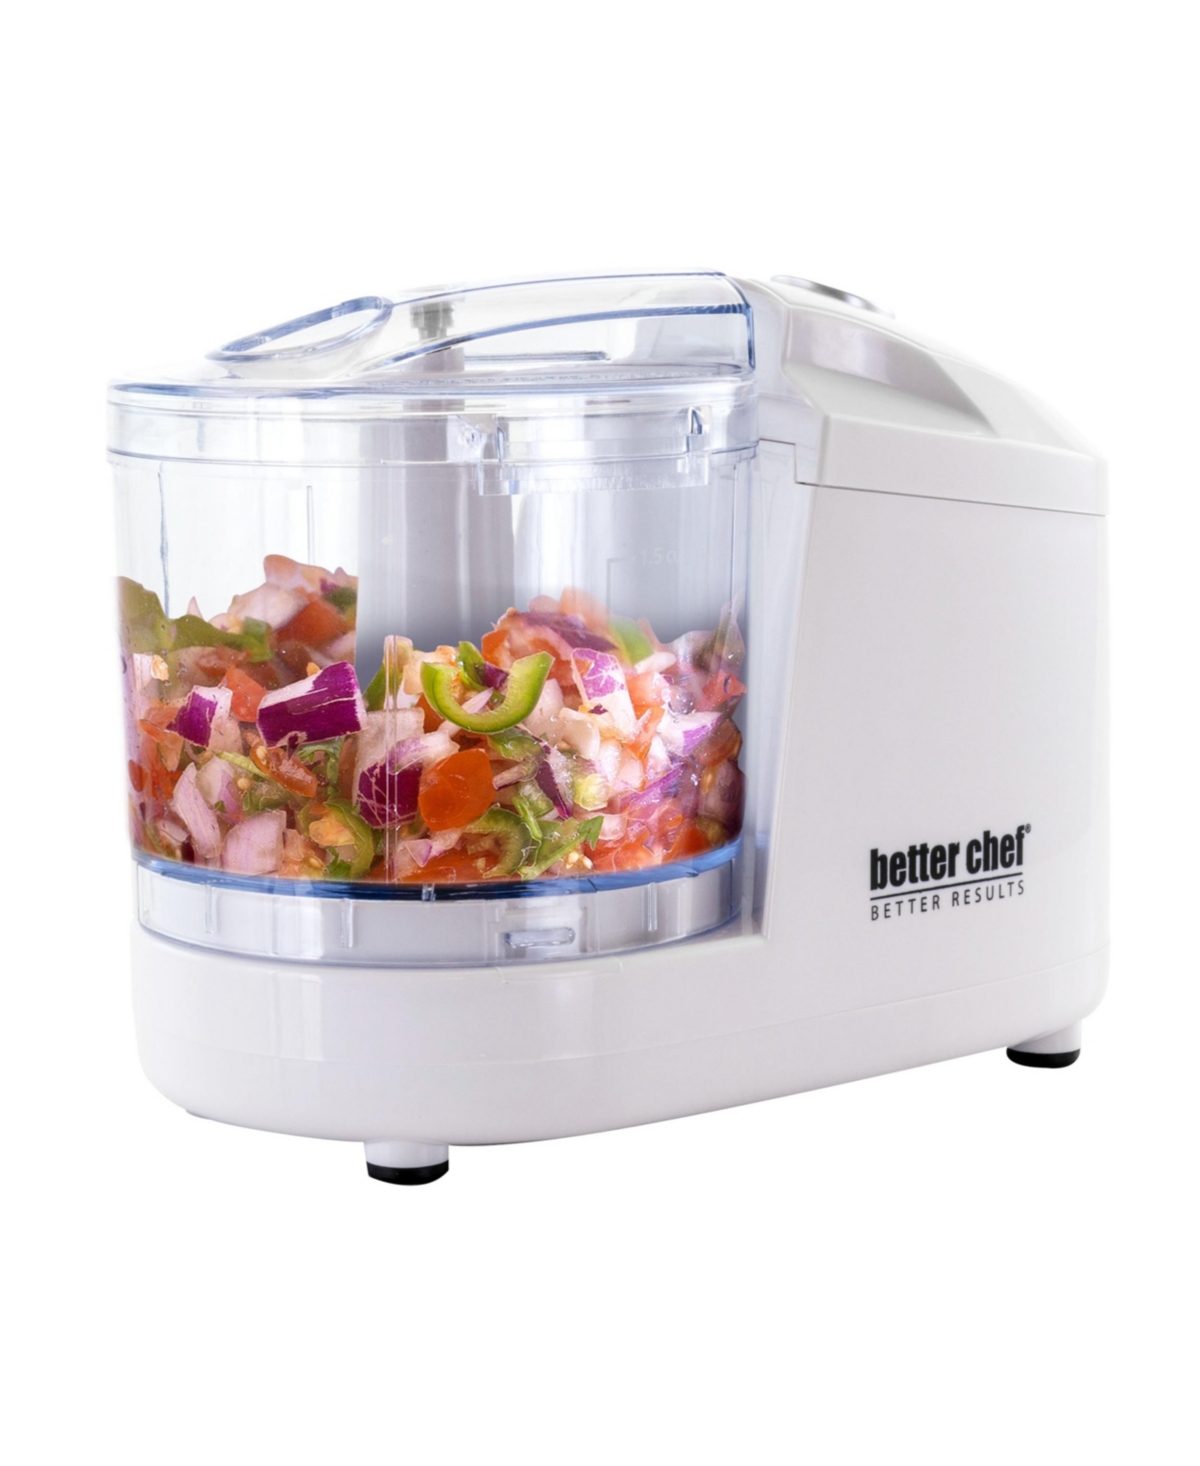 15857478 Better Chef 1.5 Cup Compact Chopper in White sku 15857478